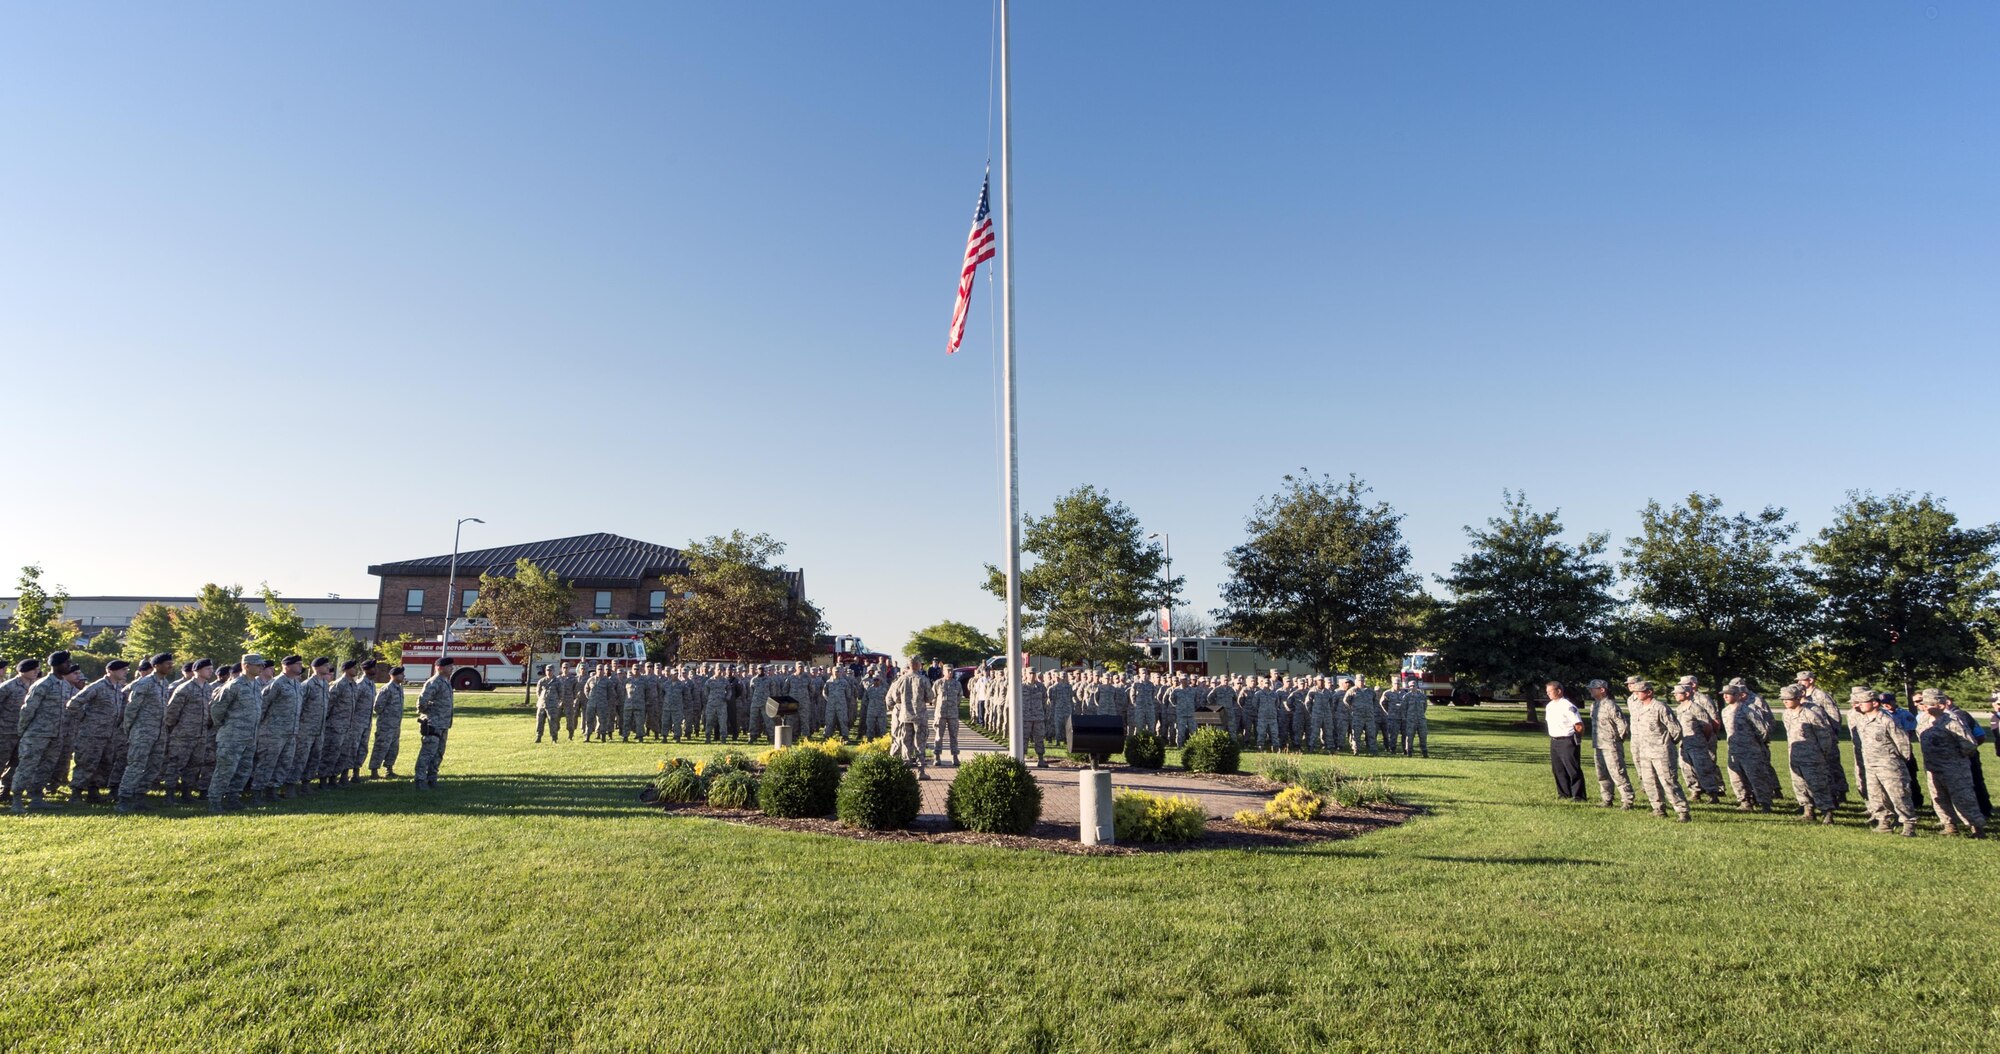 Firefighters, Airmen and civil servants pay respect to an American flag at half-staff during a 9/11 remembrance ceremony at Grissom Air Reserve Base, Ind., Sept. 11, 2016. The base gathered together for the ceremony that began at 8:46 a.m., the same time the first aircraft hit the World Trade Center in 2001. (U.S. Air Force photo/Tech. Sgt. Benjamin Mota)